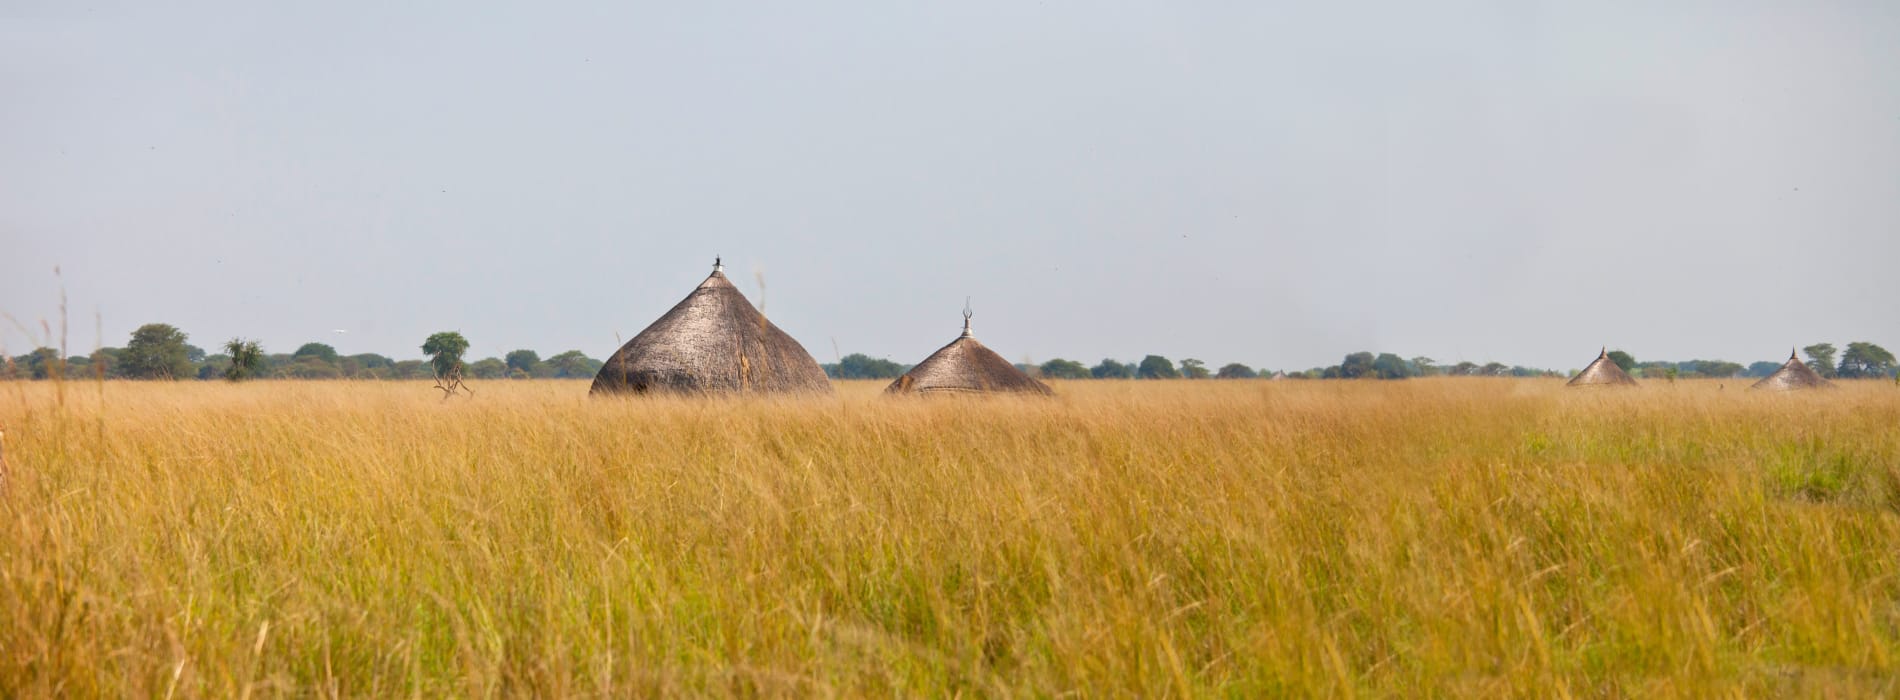 Grasslands in South Sudan with straw huts.